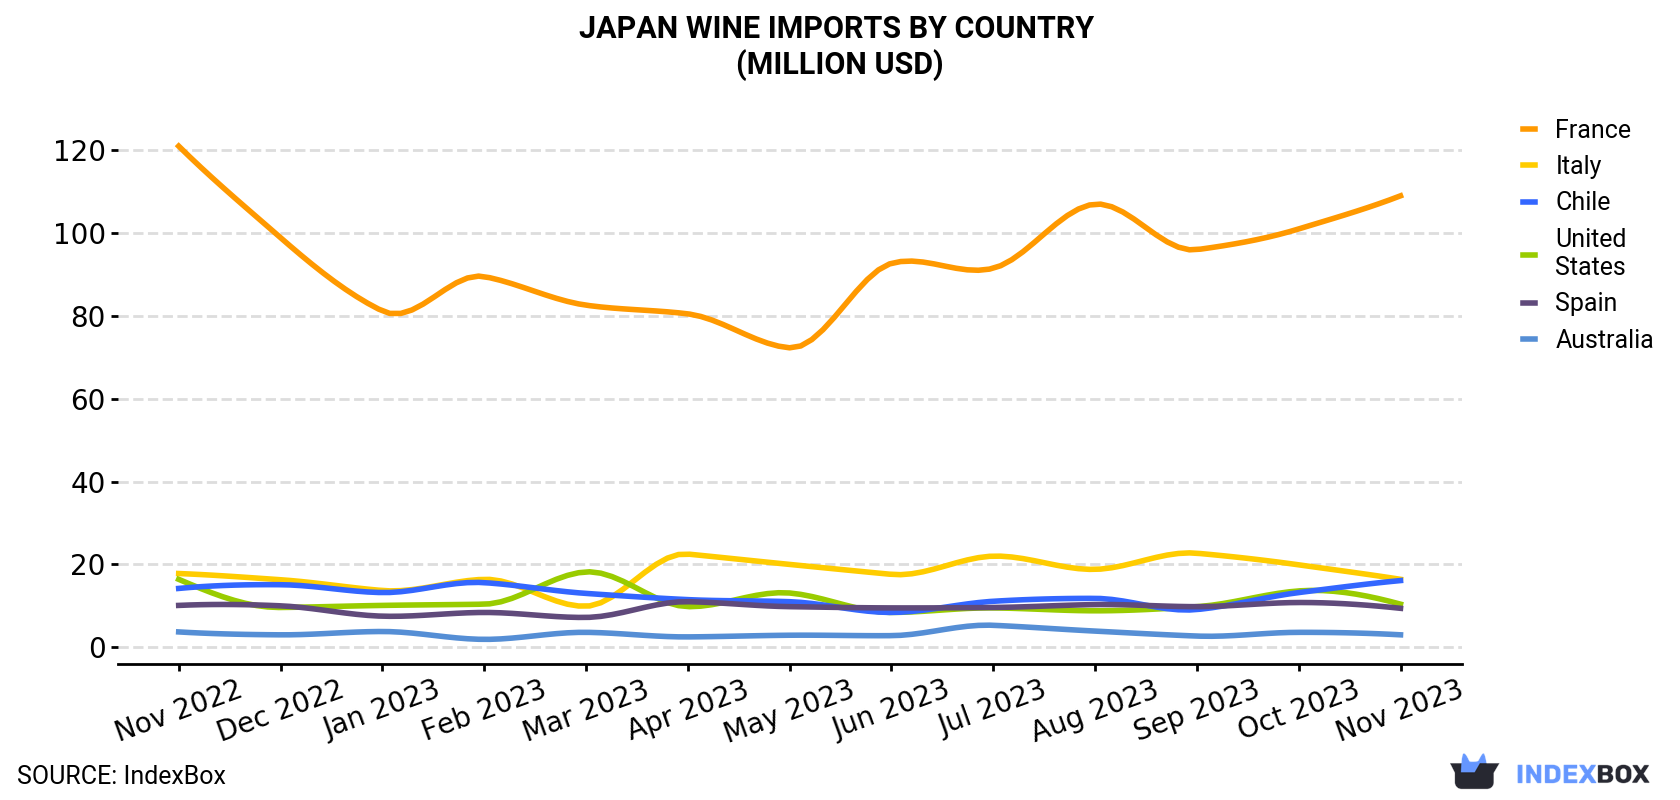 Japan Wine Imports By Country (Million USD)